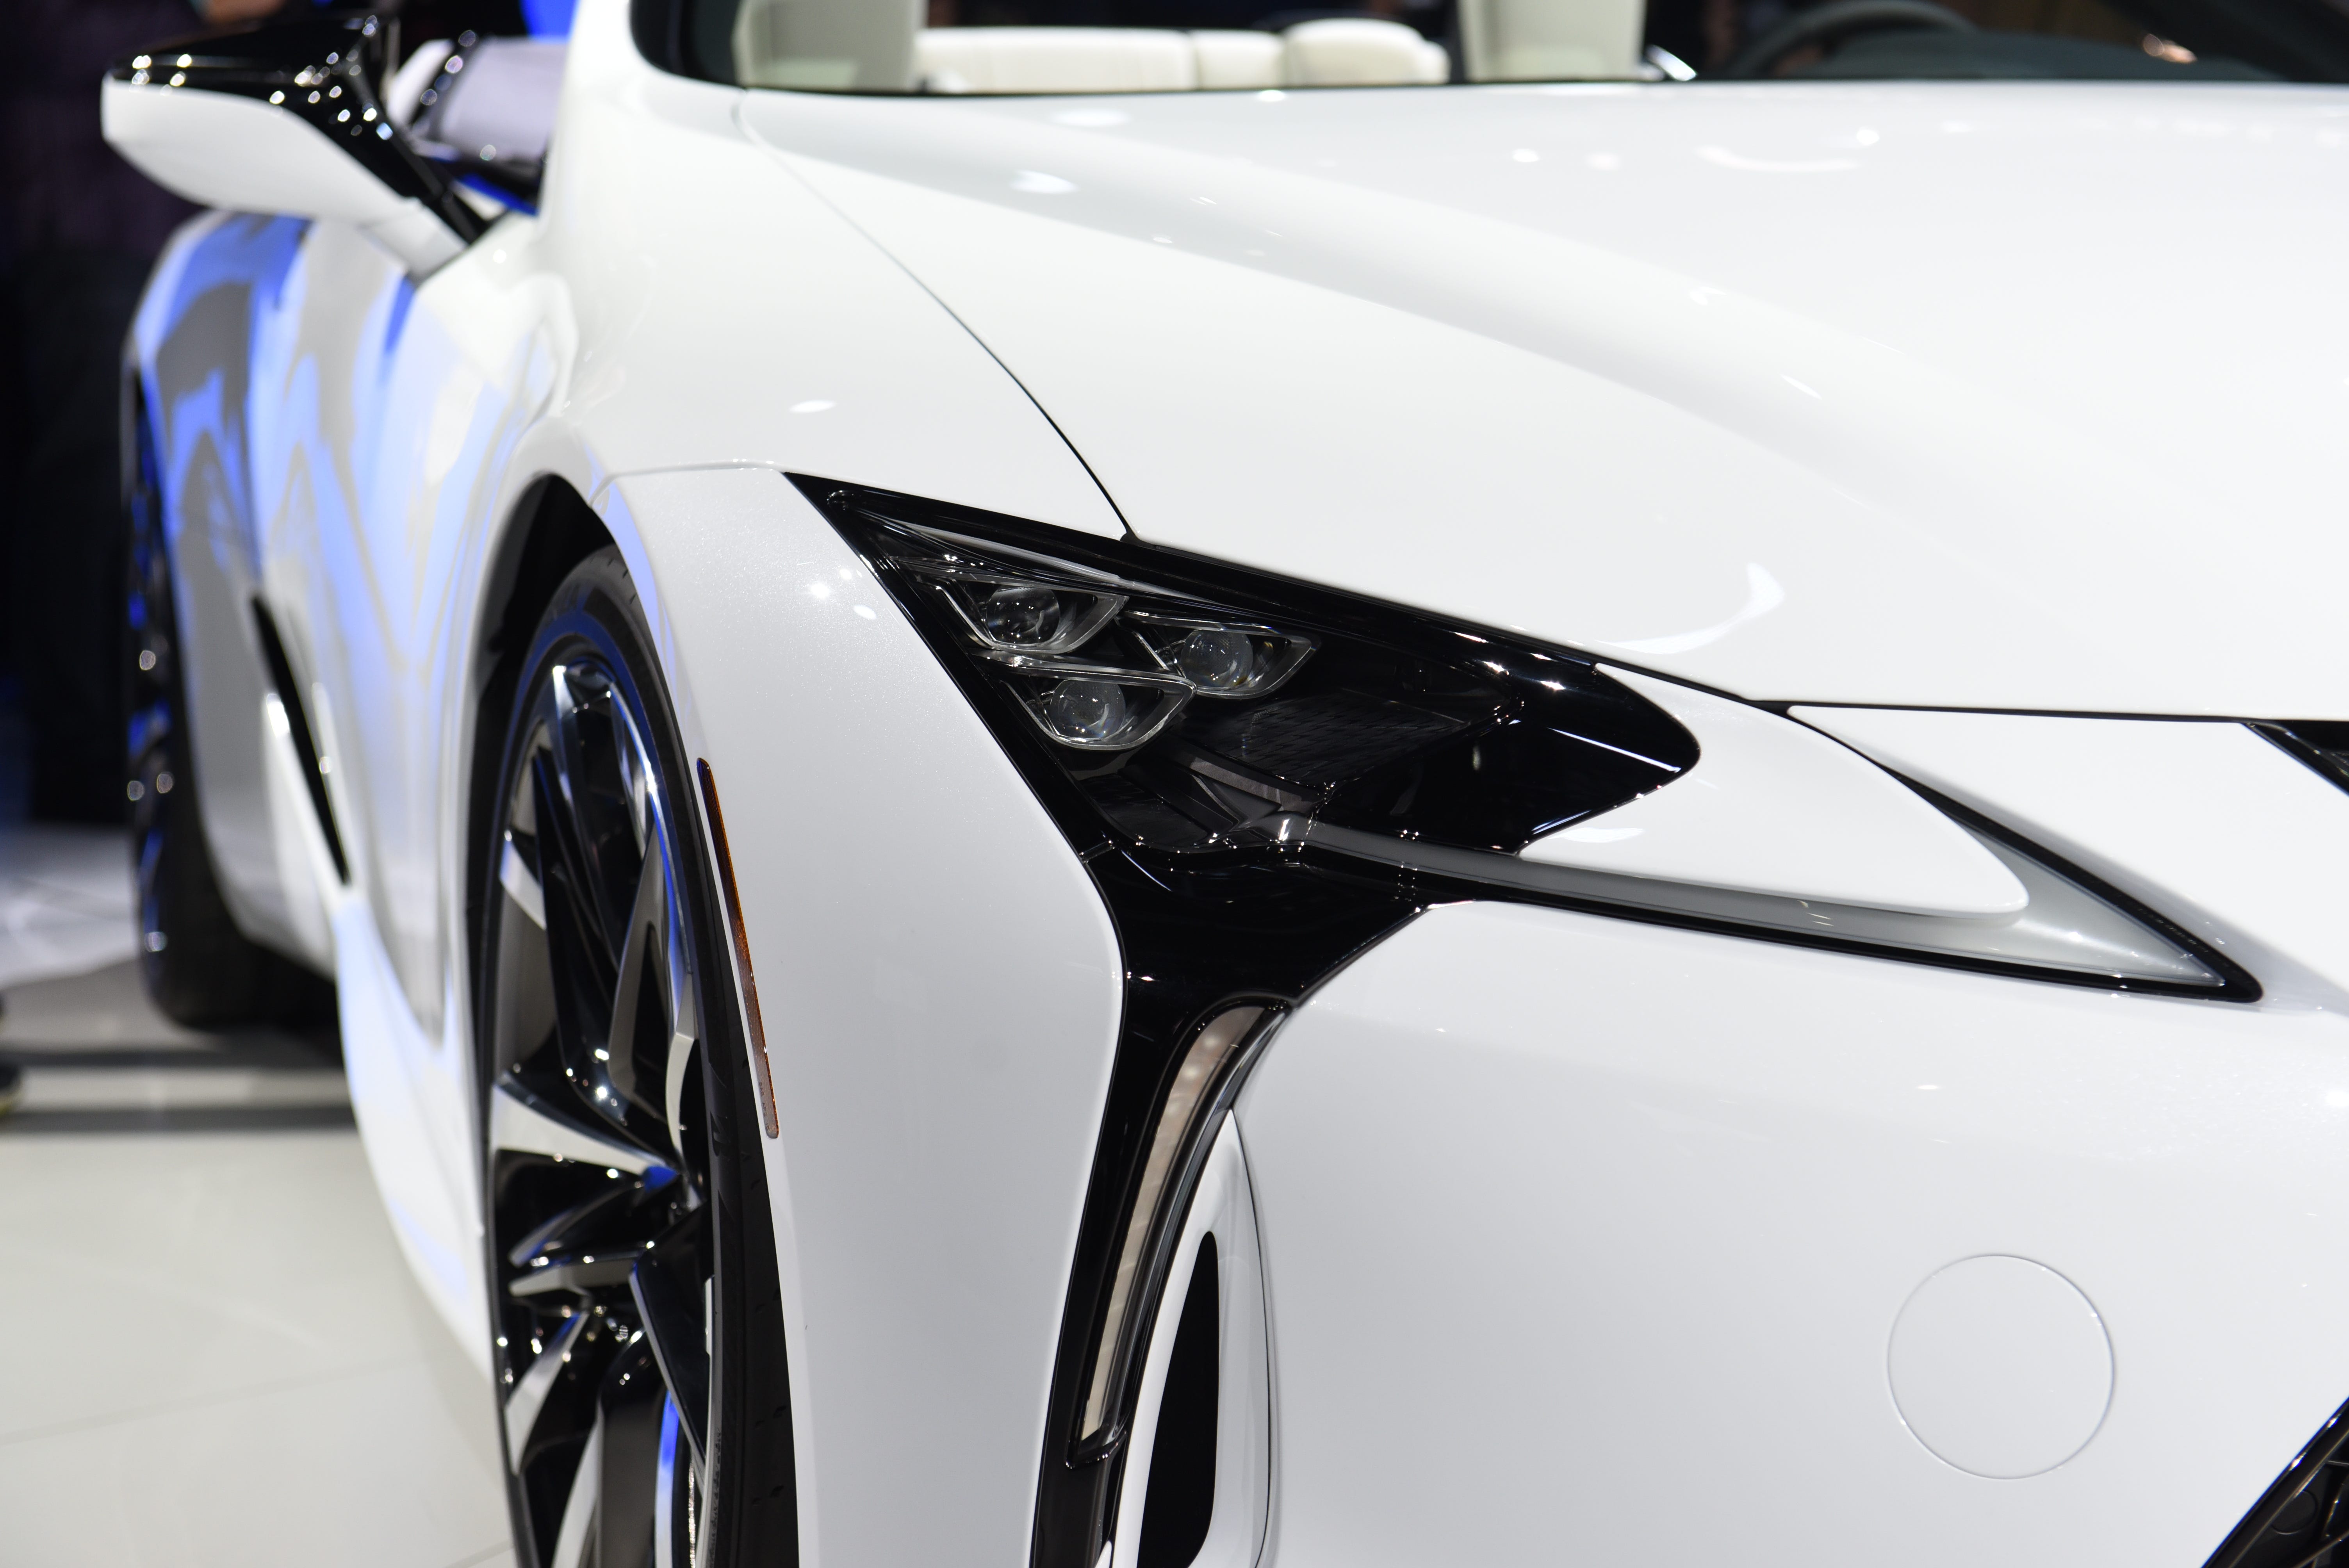 This is the passenger's side headlight on the Lexus LC Convertible concept.